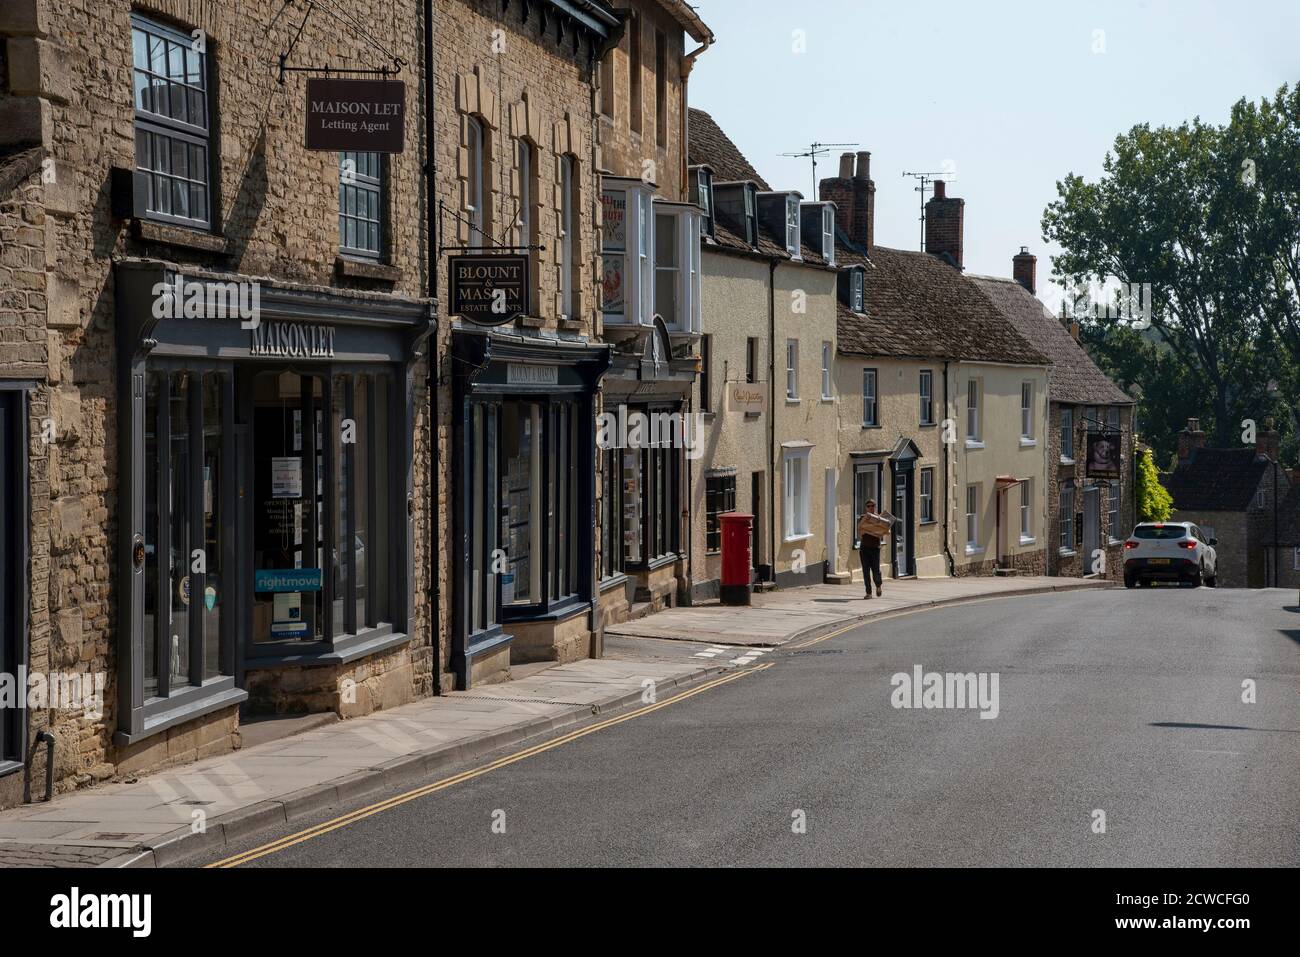 Malmesbury, Wiltshire, England, UK. 2020.  Old shops and housing on the High Street in Malmesbury, Wiltshire on the High Street  in this market town, Stock Photo